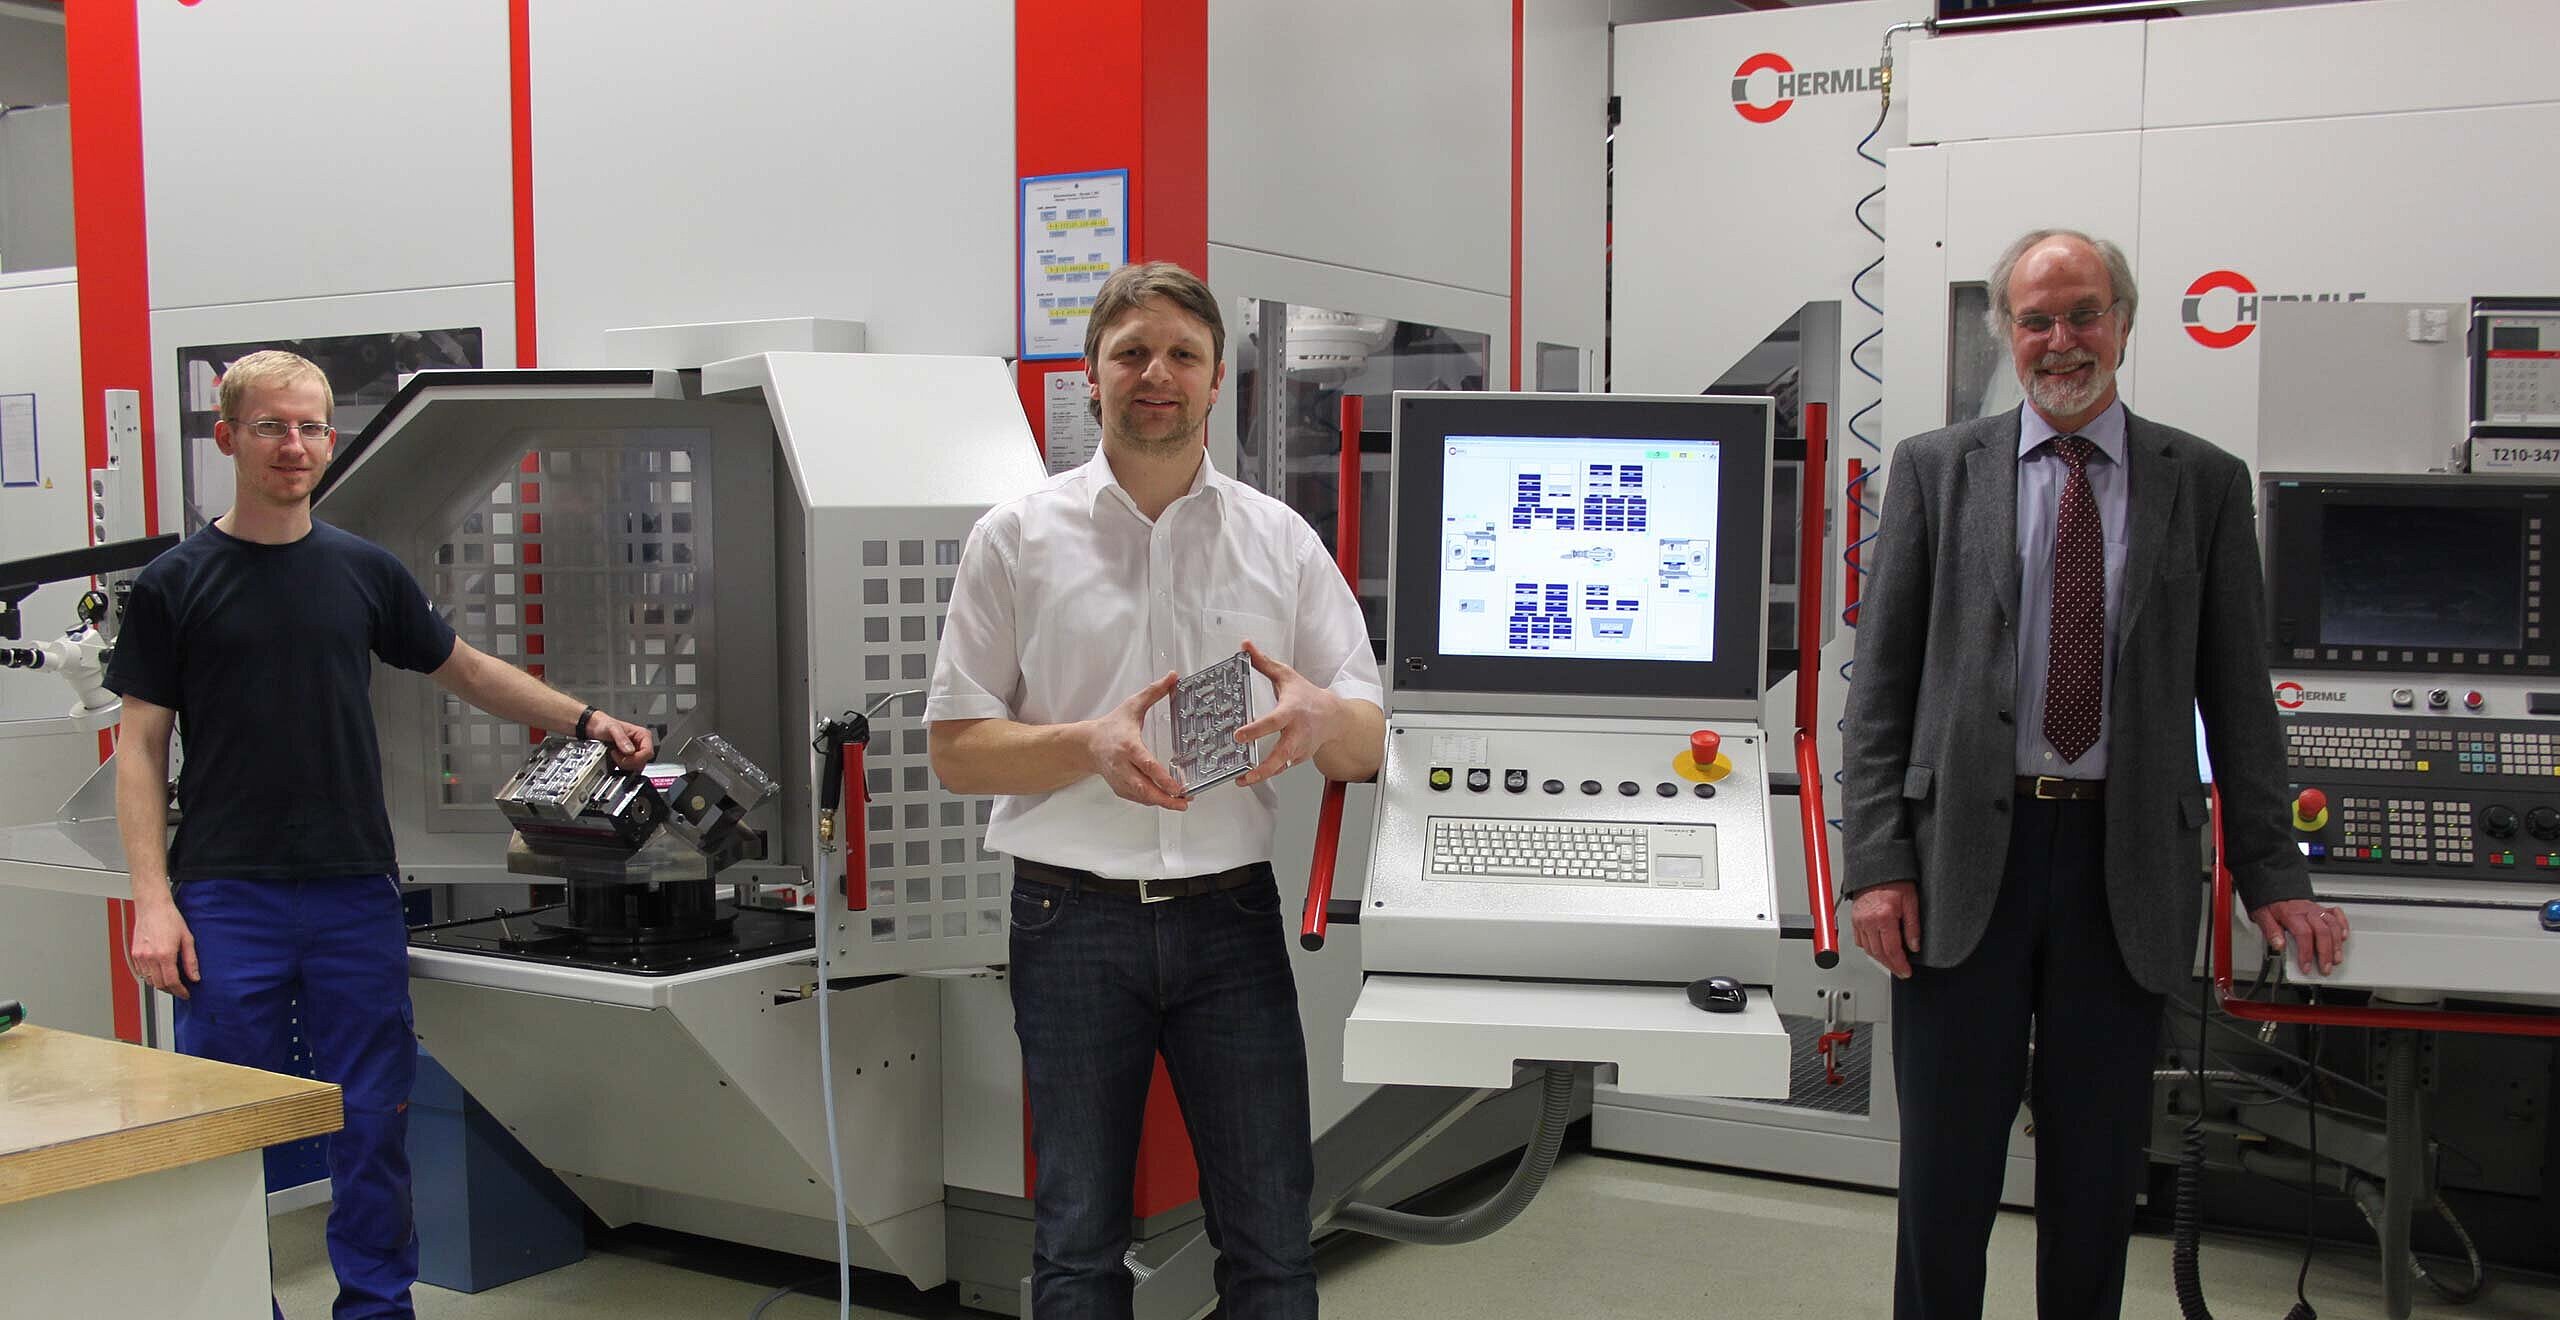 Martin Blüml, Machine/System Operator, Andreas Bauer, Director of CNC Vertical Milling, both from Rohde & Schwarz Teisnach plant, and Manfred Moser, Sales Representative of Hermle + Partner Vertriebs GmbH